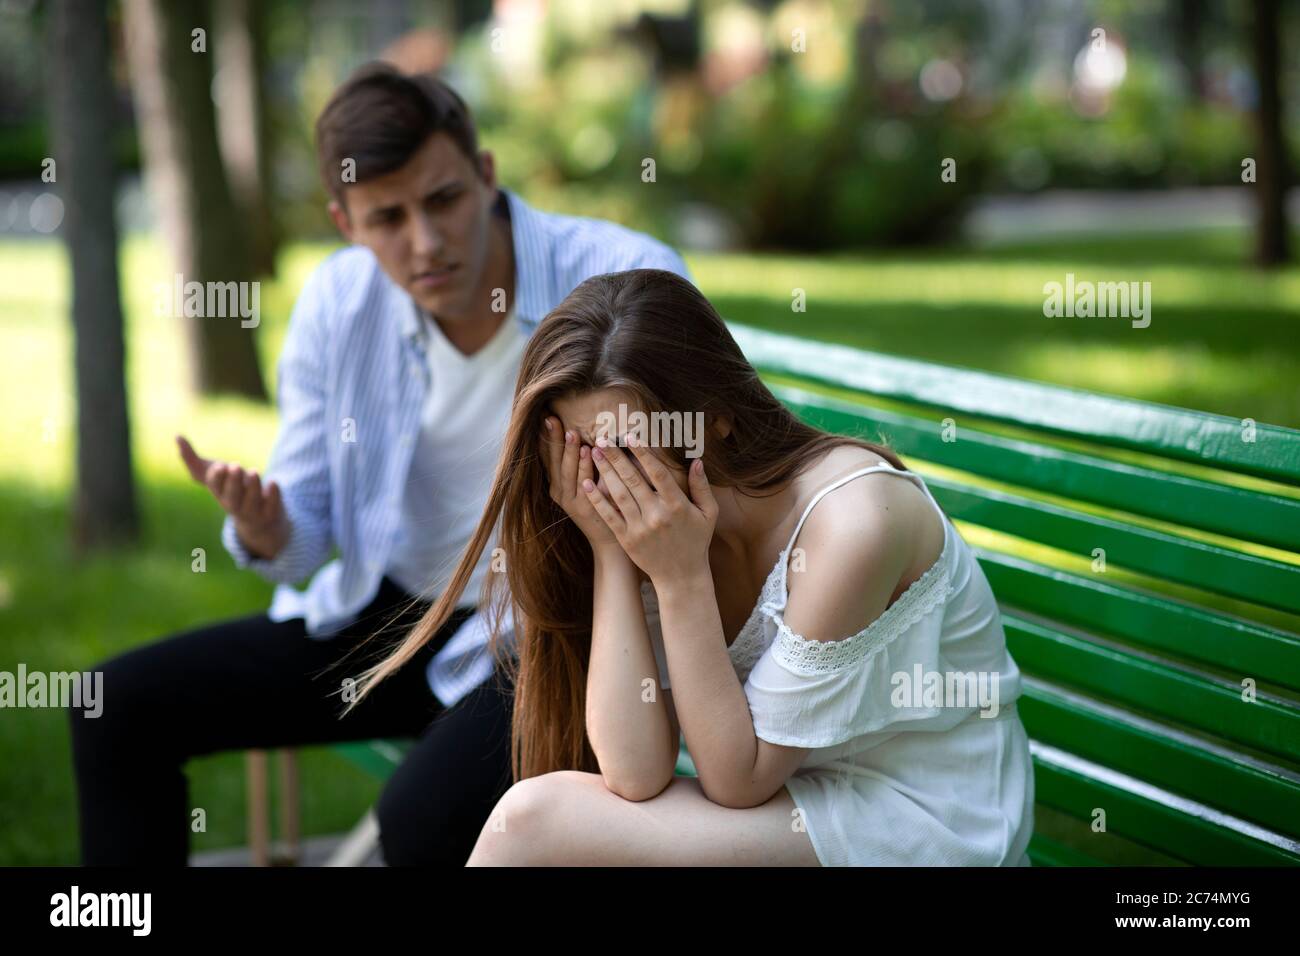 Sad young girl crying during conflict with her boyfriend on bench ...